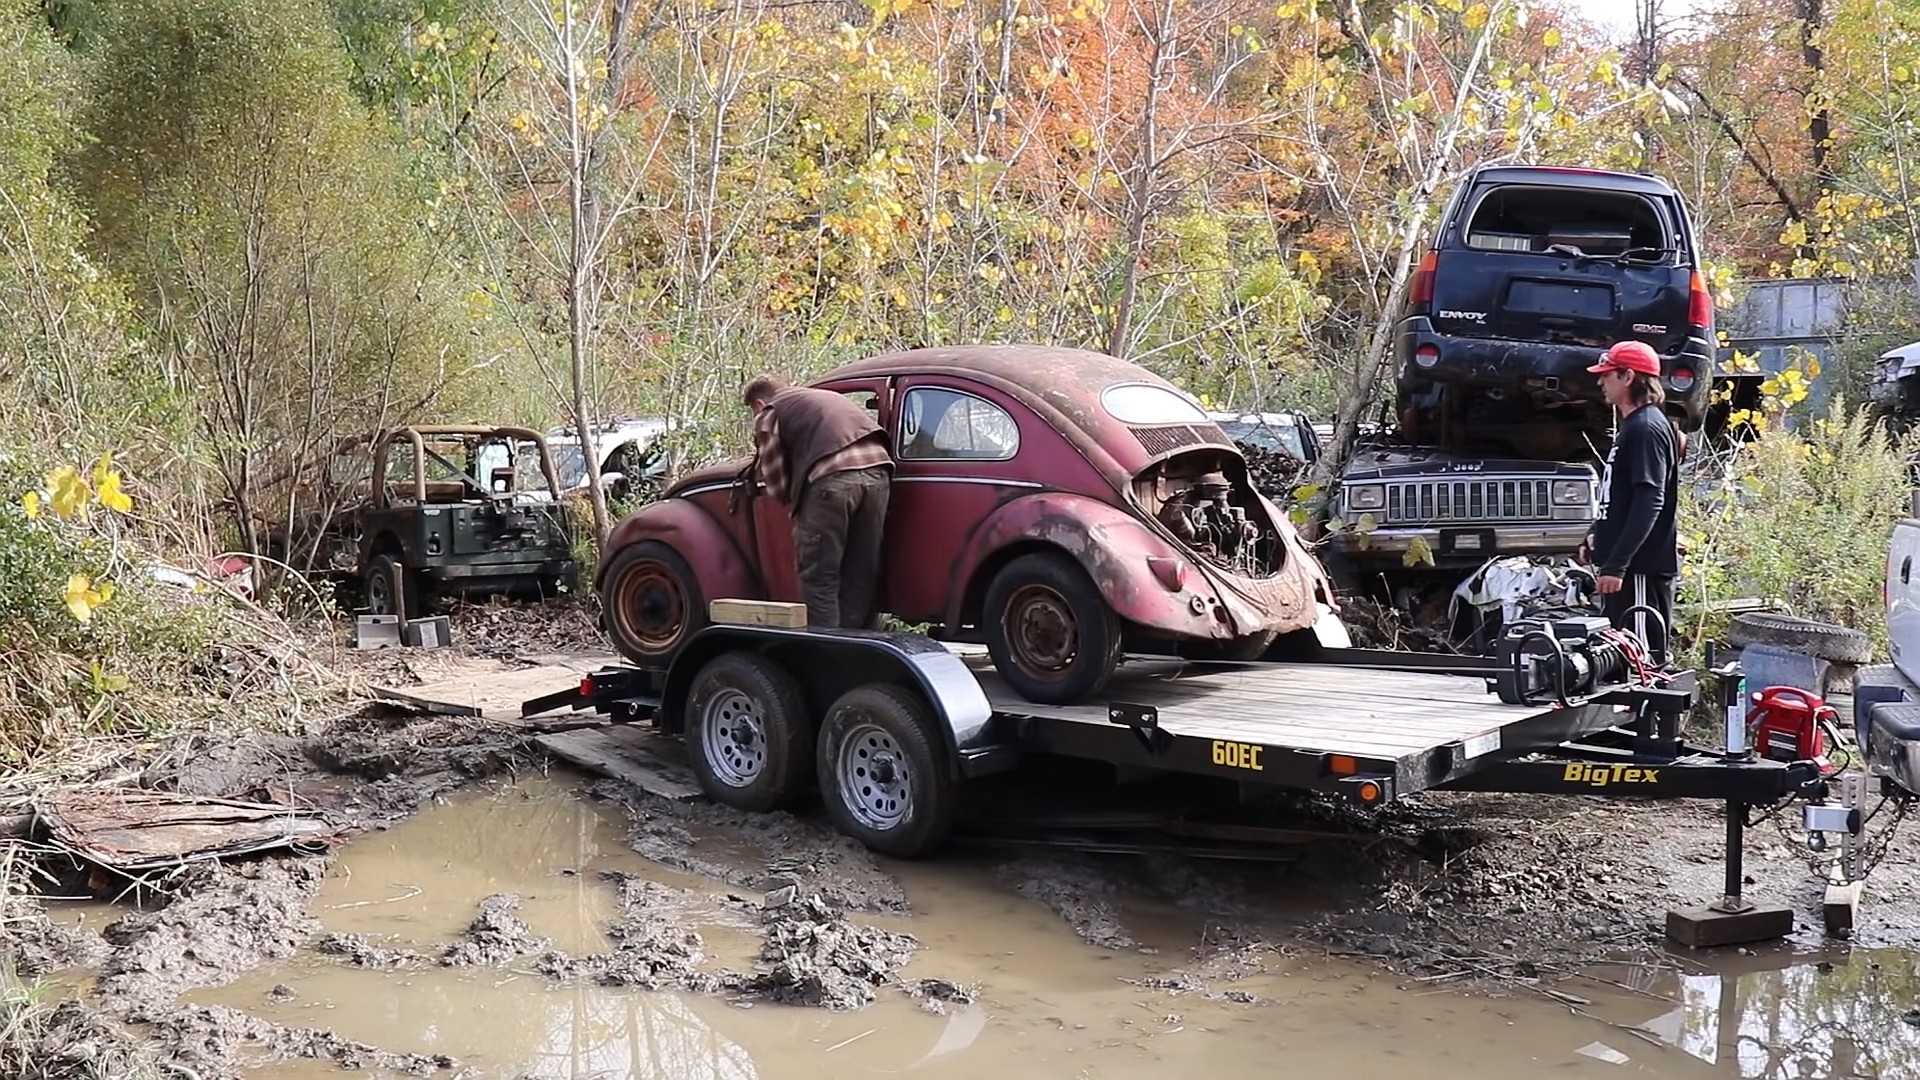 rare vw beetle spent 52 years in a junkyard gets rescued for full restoration 7